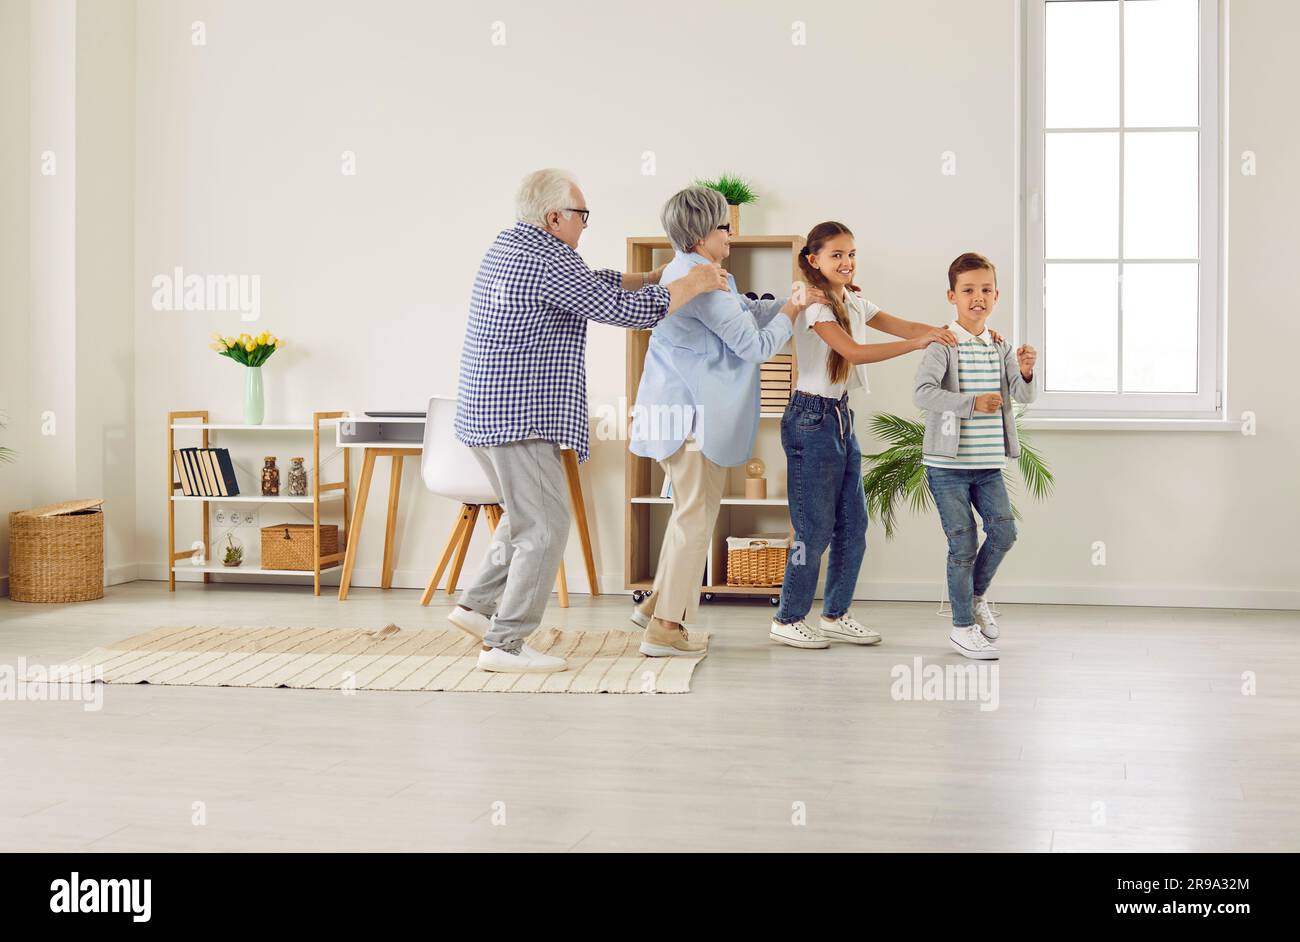 Happy, funny grandparents and children playing games, dancing and having fun together Stock Photo